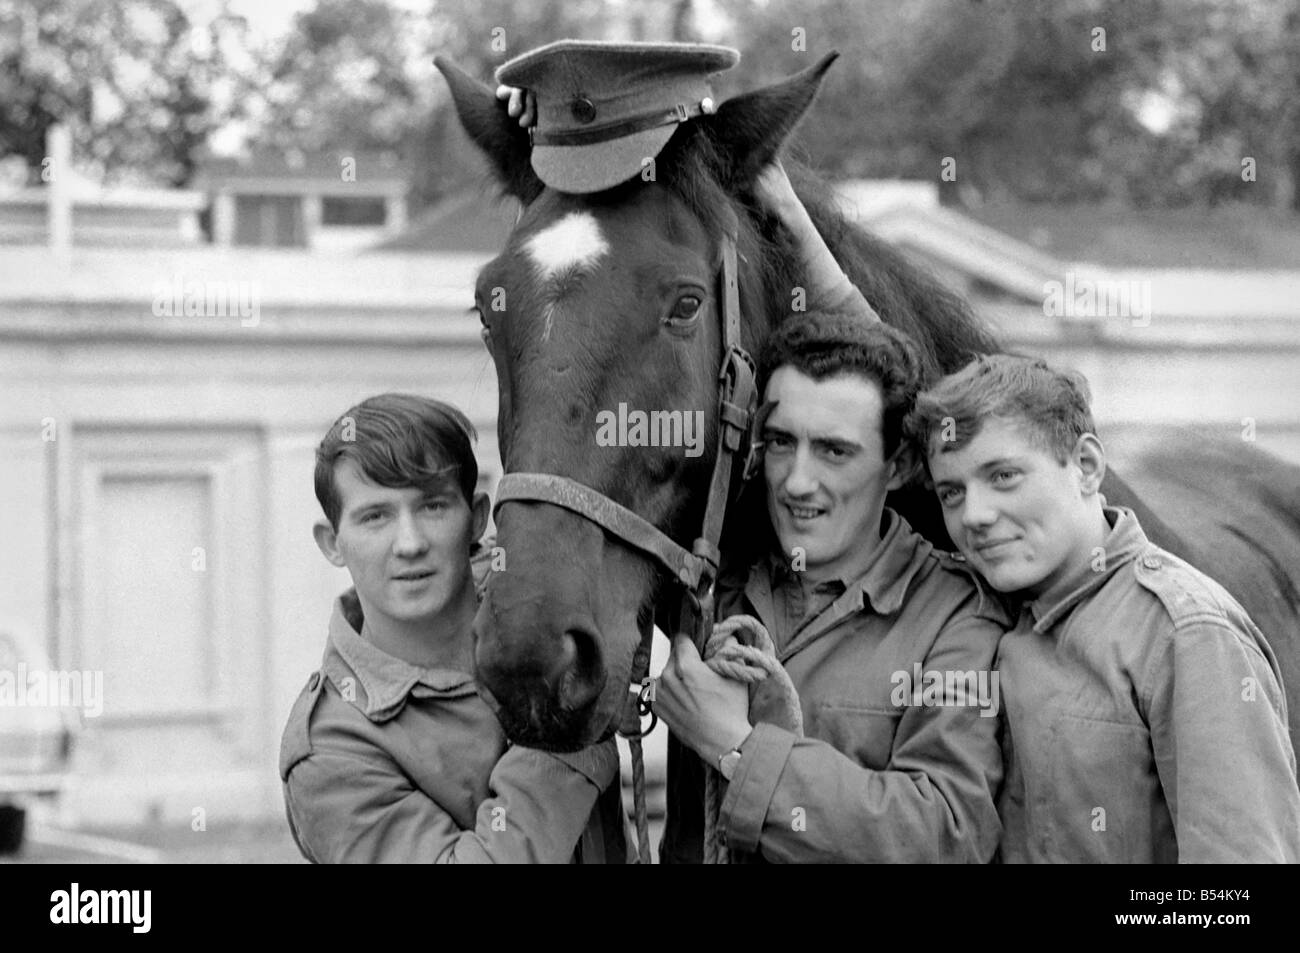 Stalin a young gelding who is one of the Queen's unwanted horses, has been given a reprieve and an attempt to re-train him is about to begin. November 1969 Z11167-002 Stock Photo